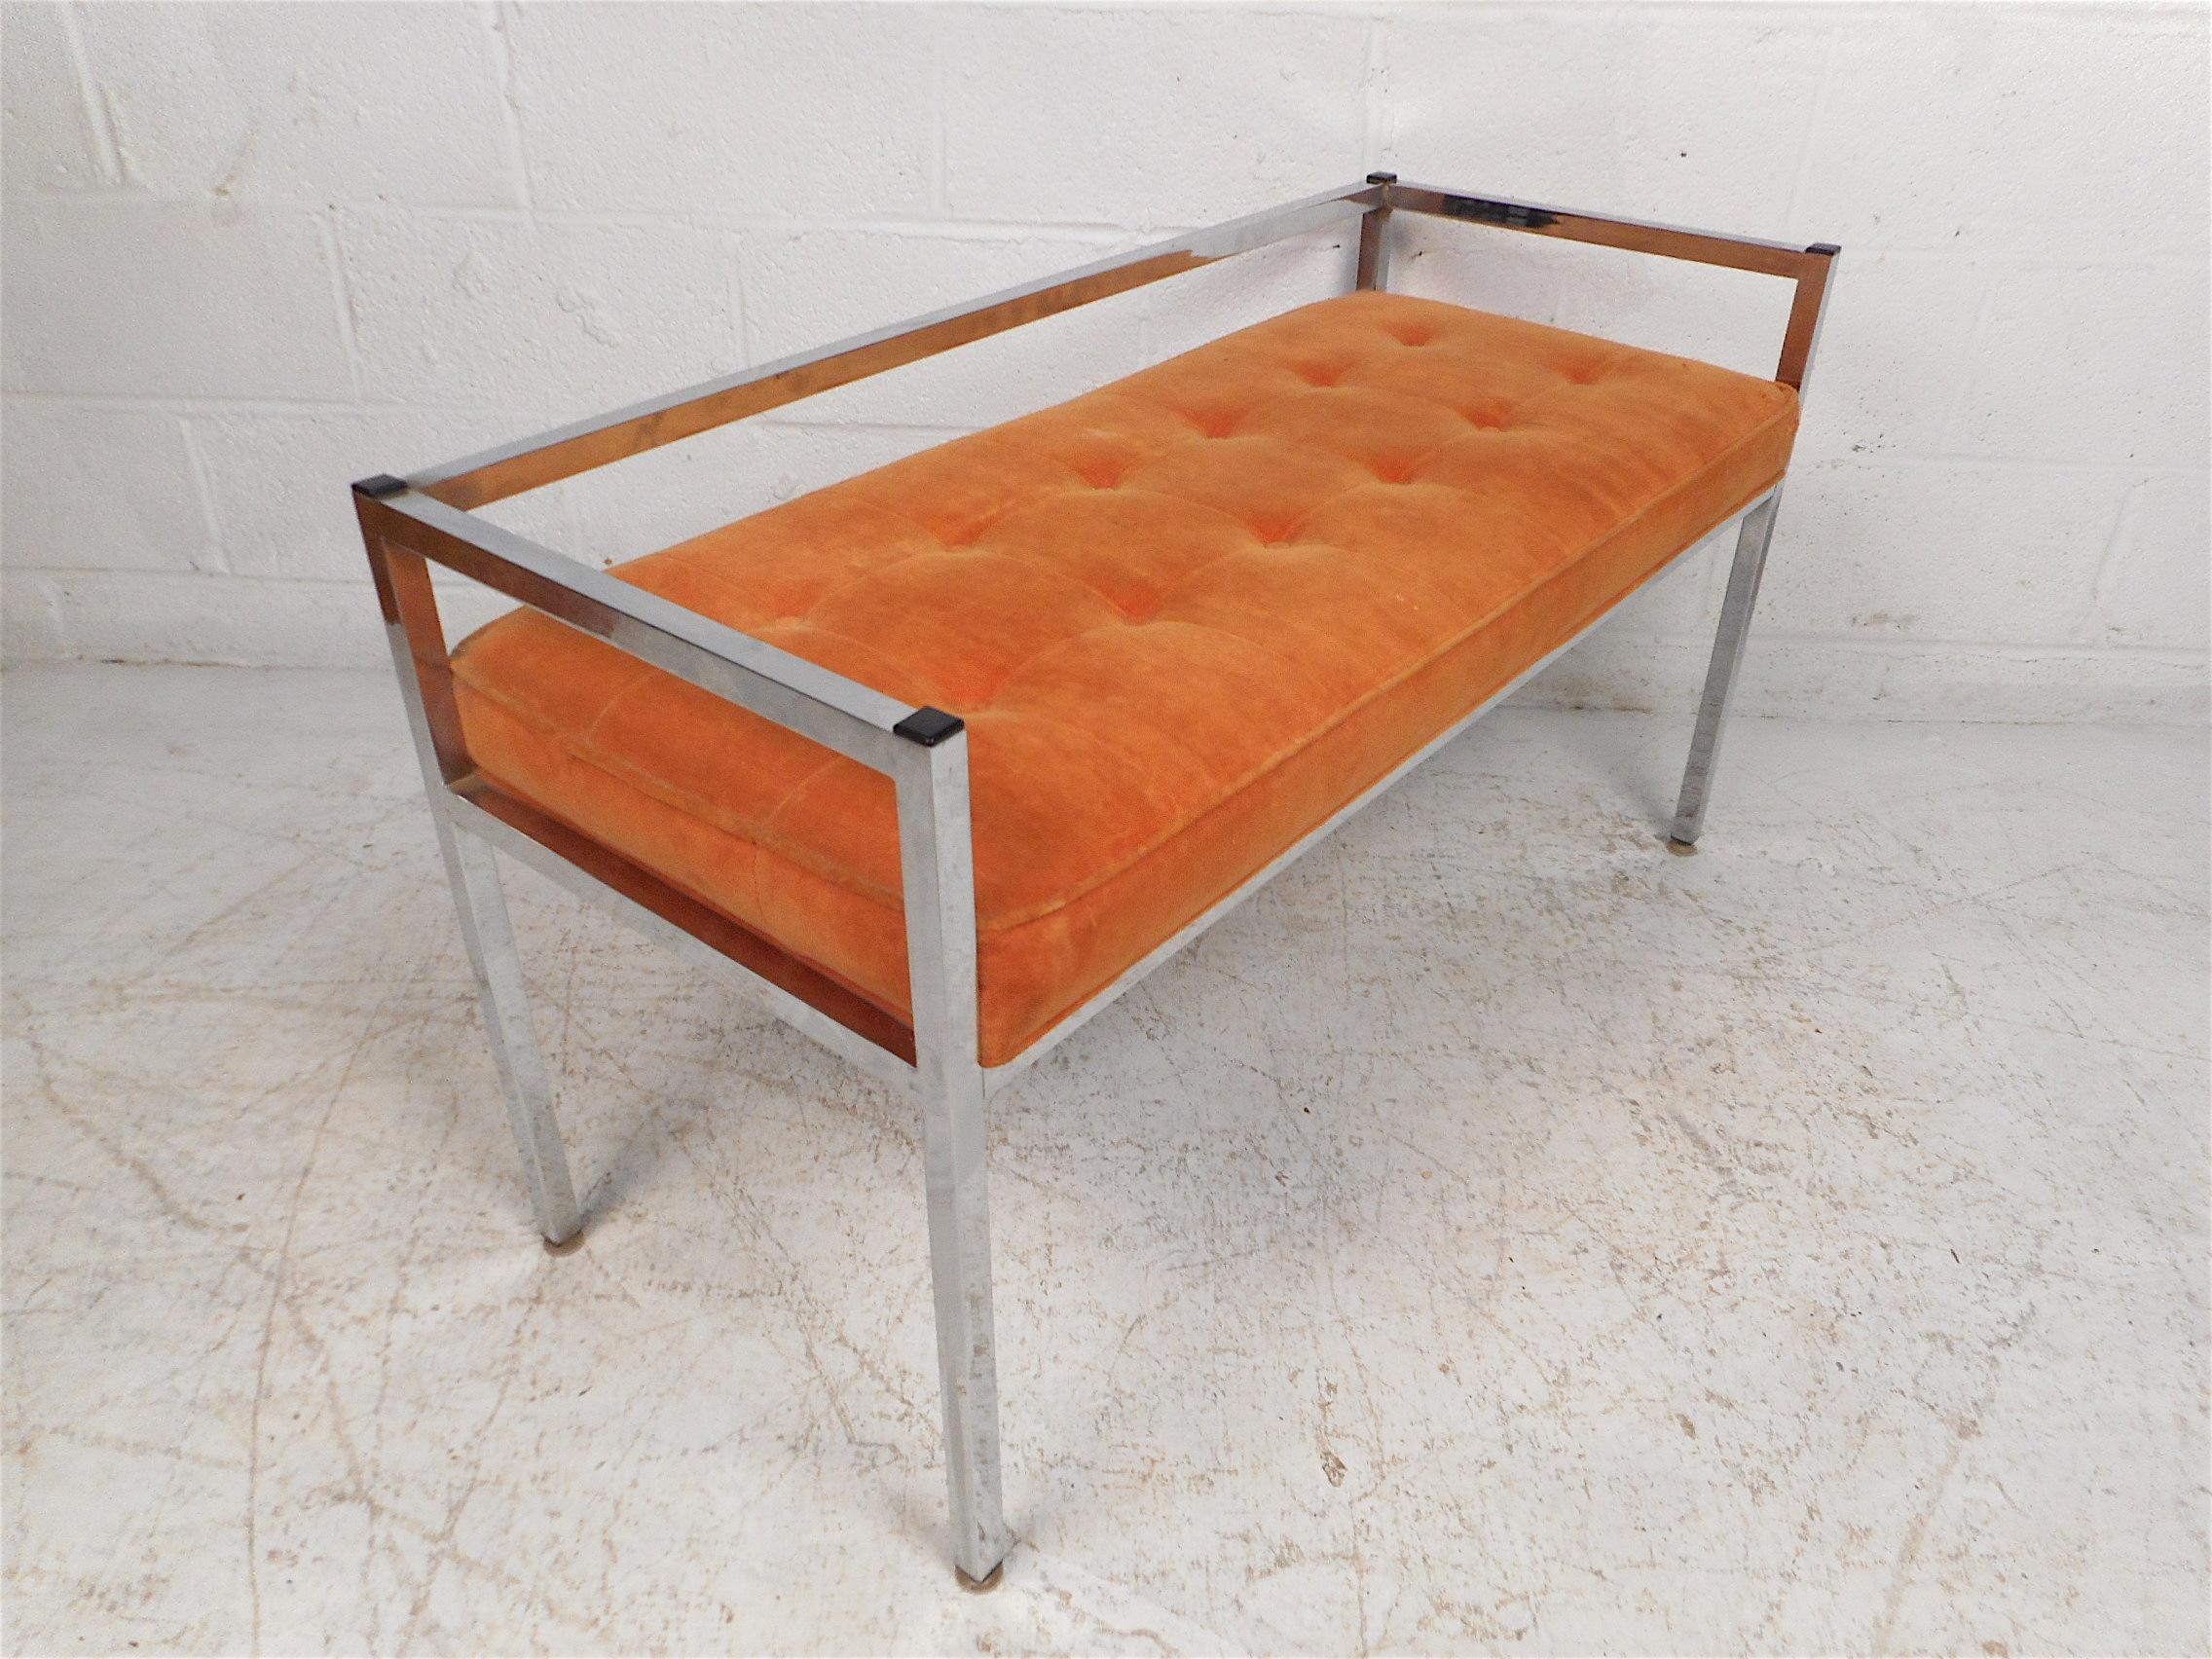 Stylish midcentury settee with a chrome frame. Seat is covered in a vintage tufted orange upholstery. Simplistic yet eye-catching design. Sure to make a great addition to any modern interior. Please confirm item location with dealer (NJ or NY).